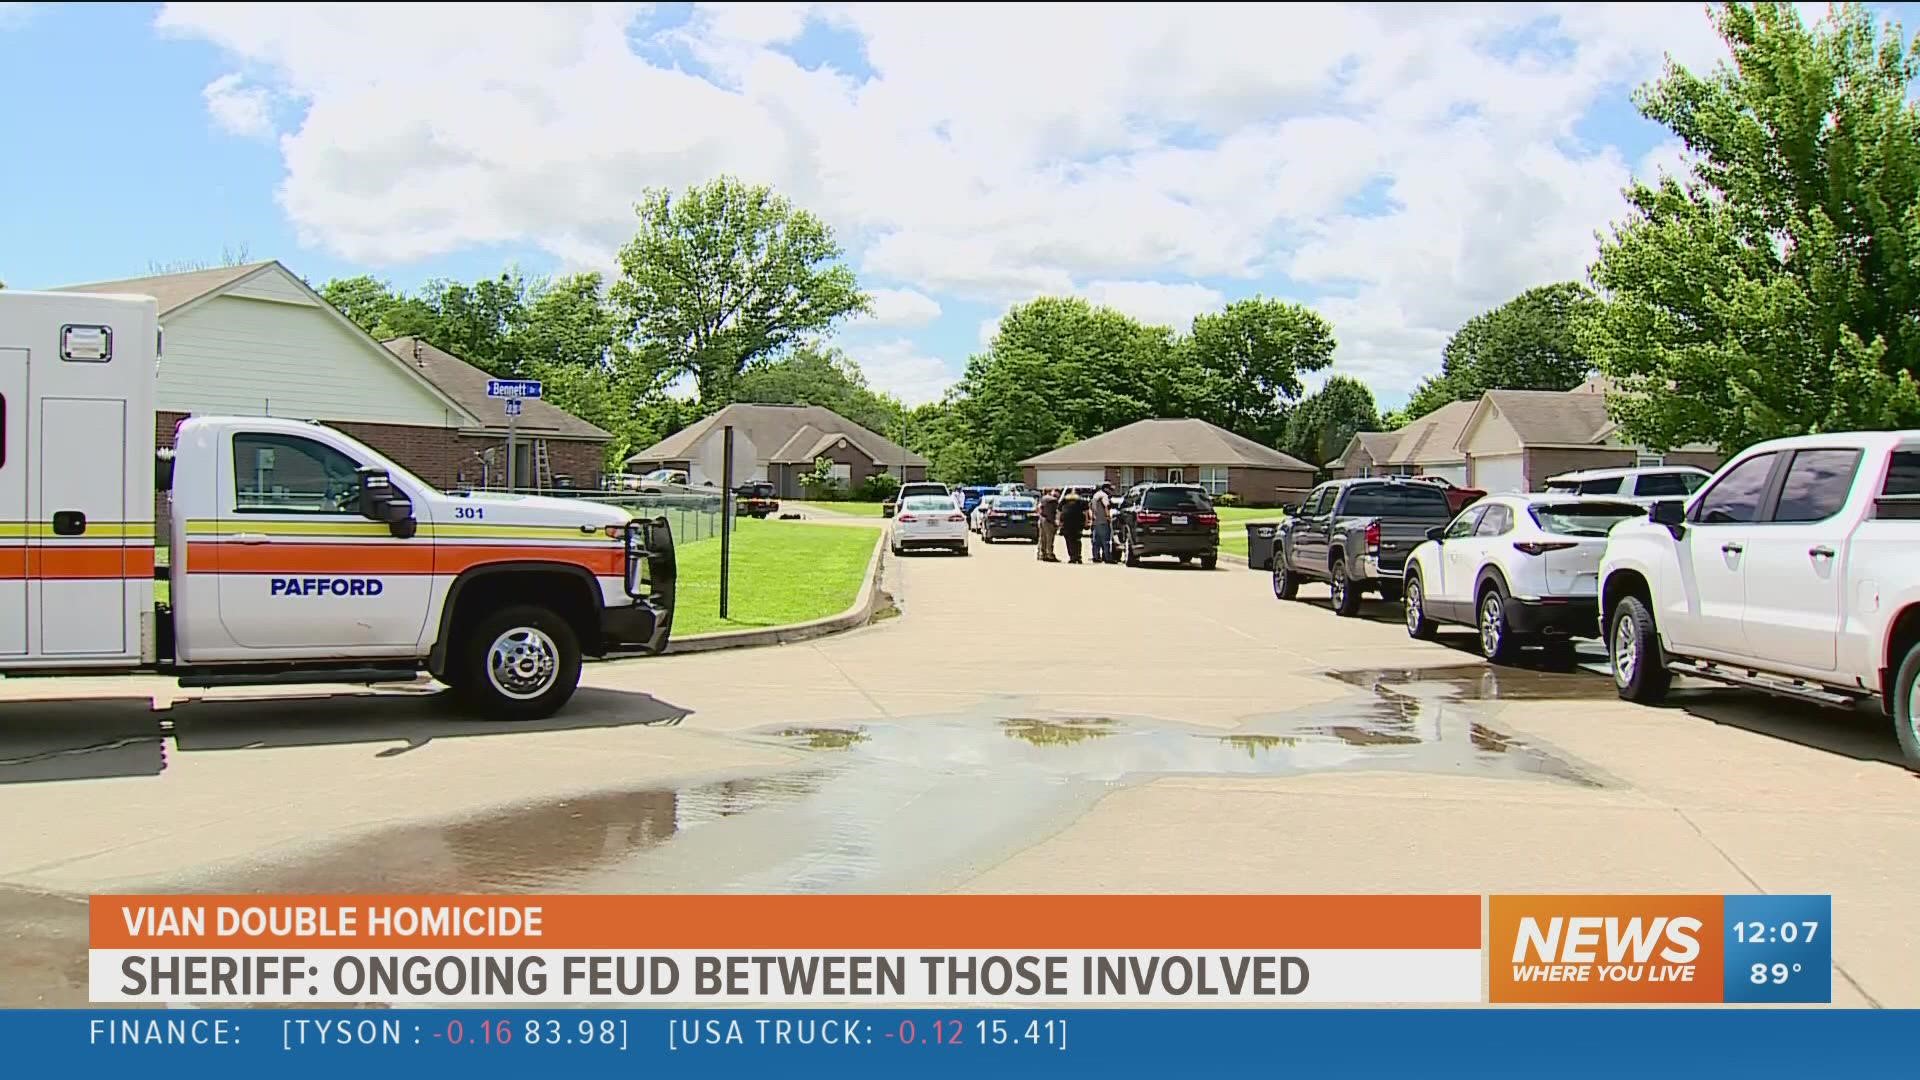 FBI agents are investigating a double homicide in Vian, Oklahoma.